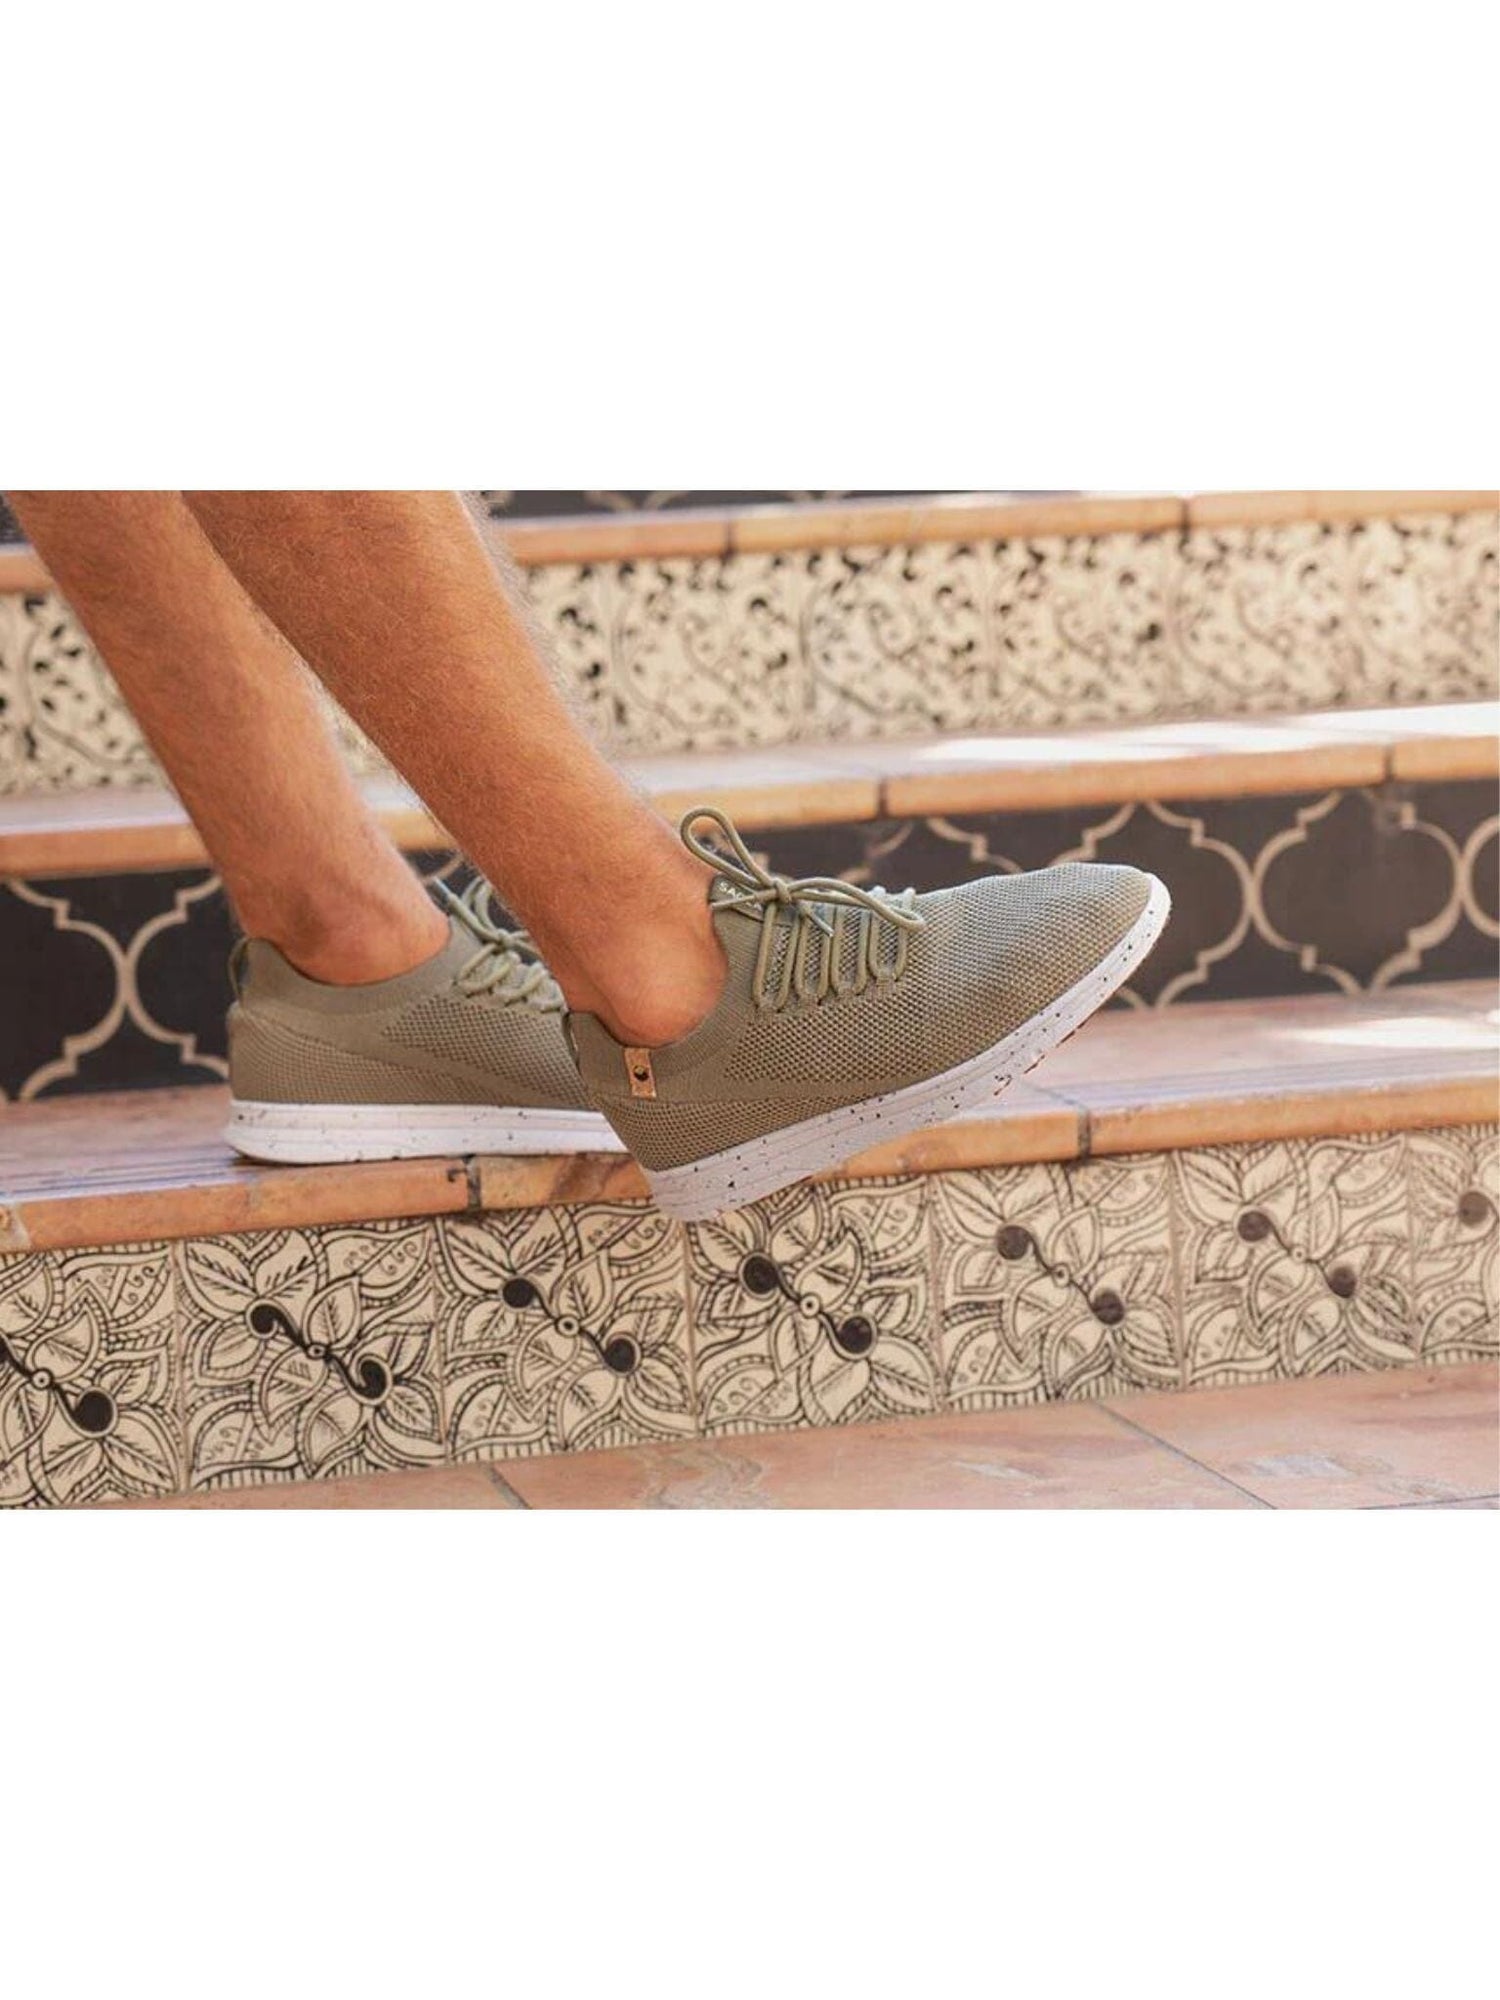 Saola M's Tsavo - 100% Vegan - Recycled and bio-sourced materials Burnt Olive Shoes